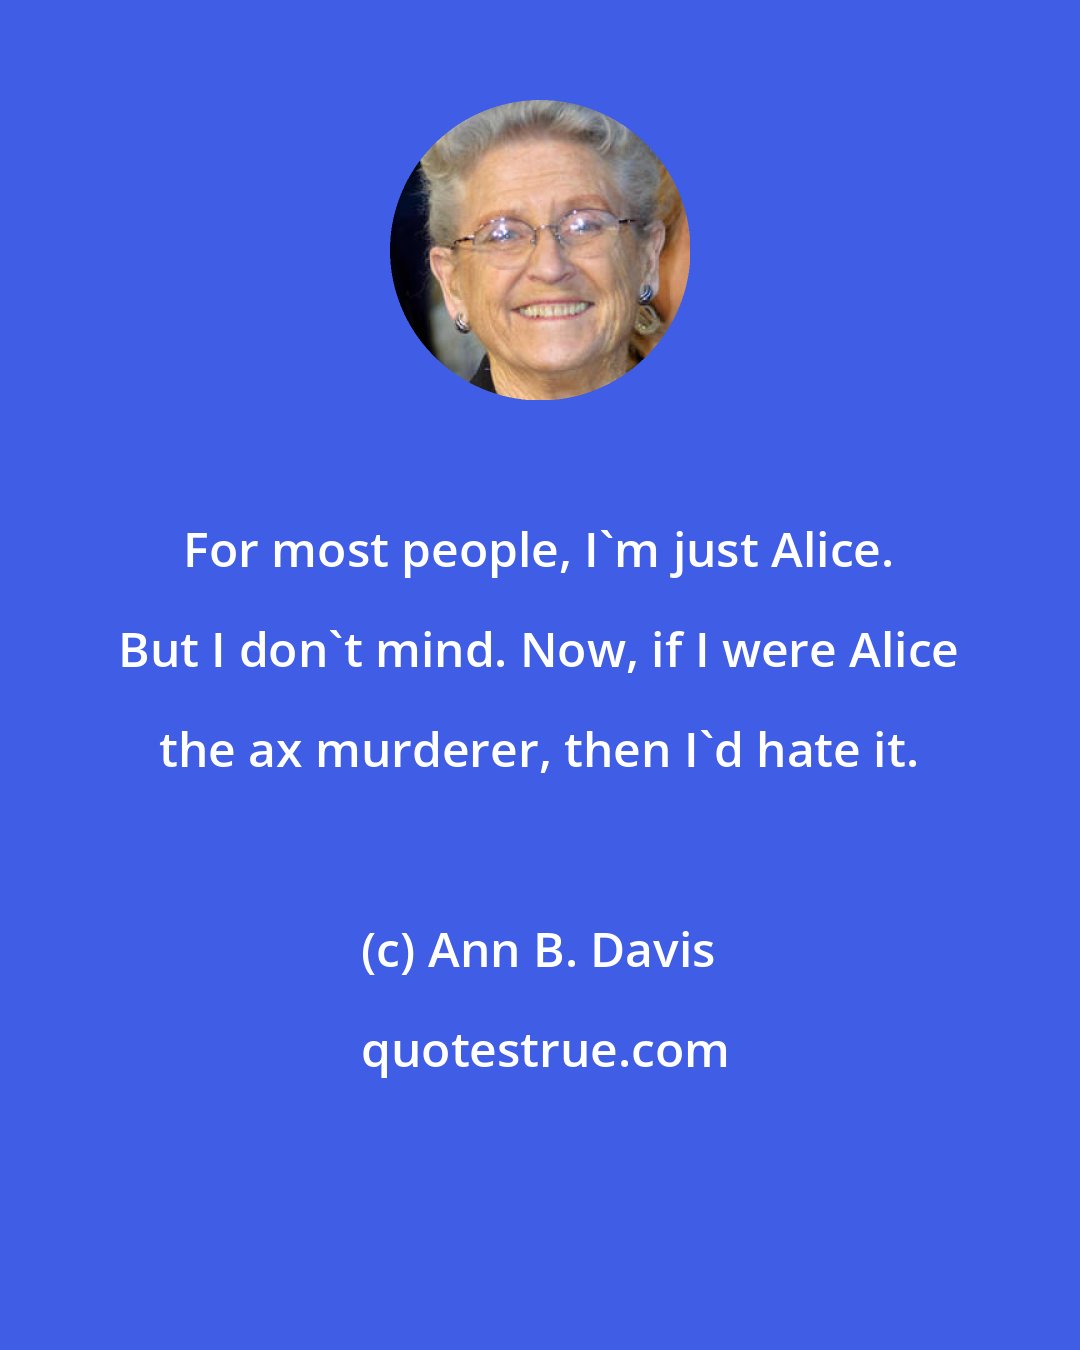 Ann B. Davis: For most people, I'm just Alice. But I don't mind. Now, if I were Alice the ax murderer, then I'd hate it.